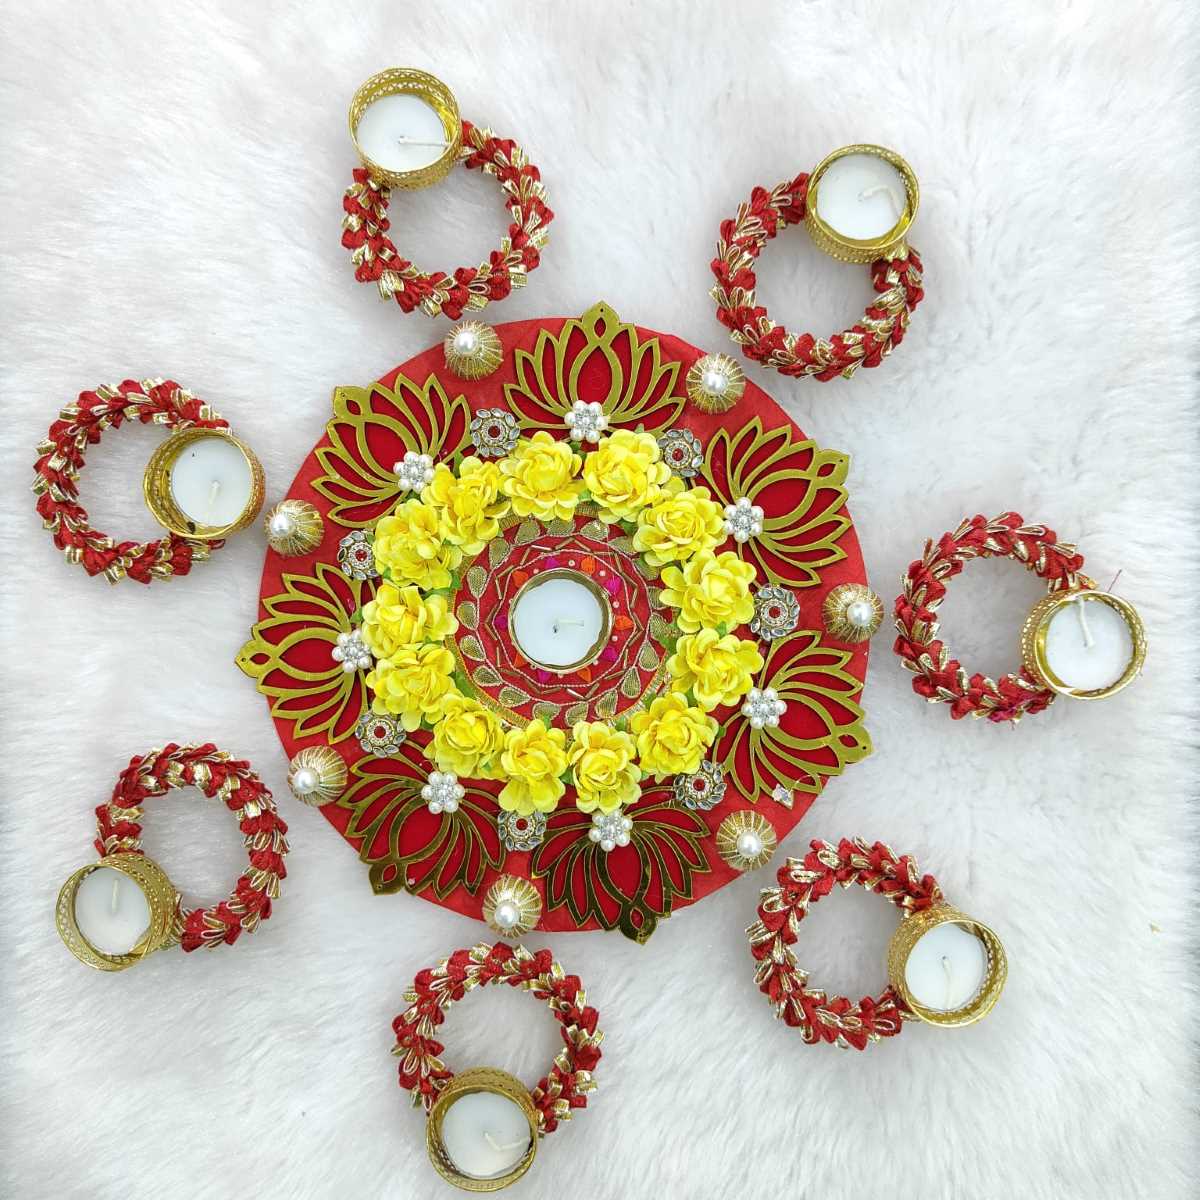 Rose Flower Rangoli Decoration With Candle Holders